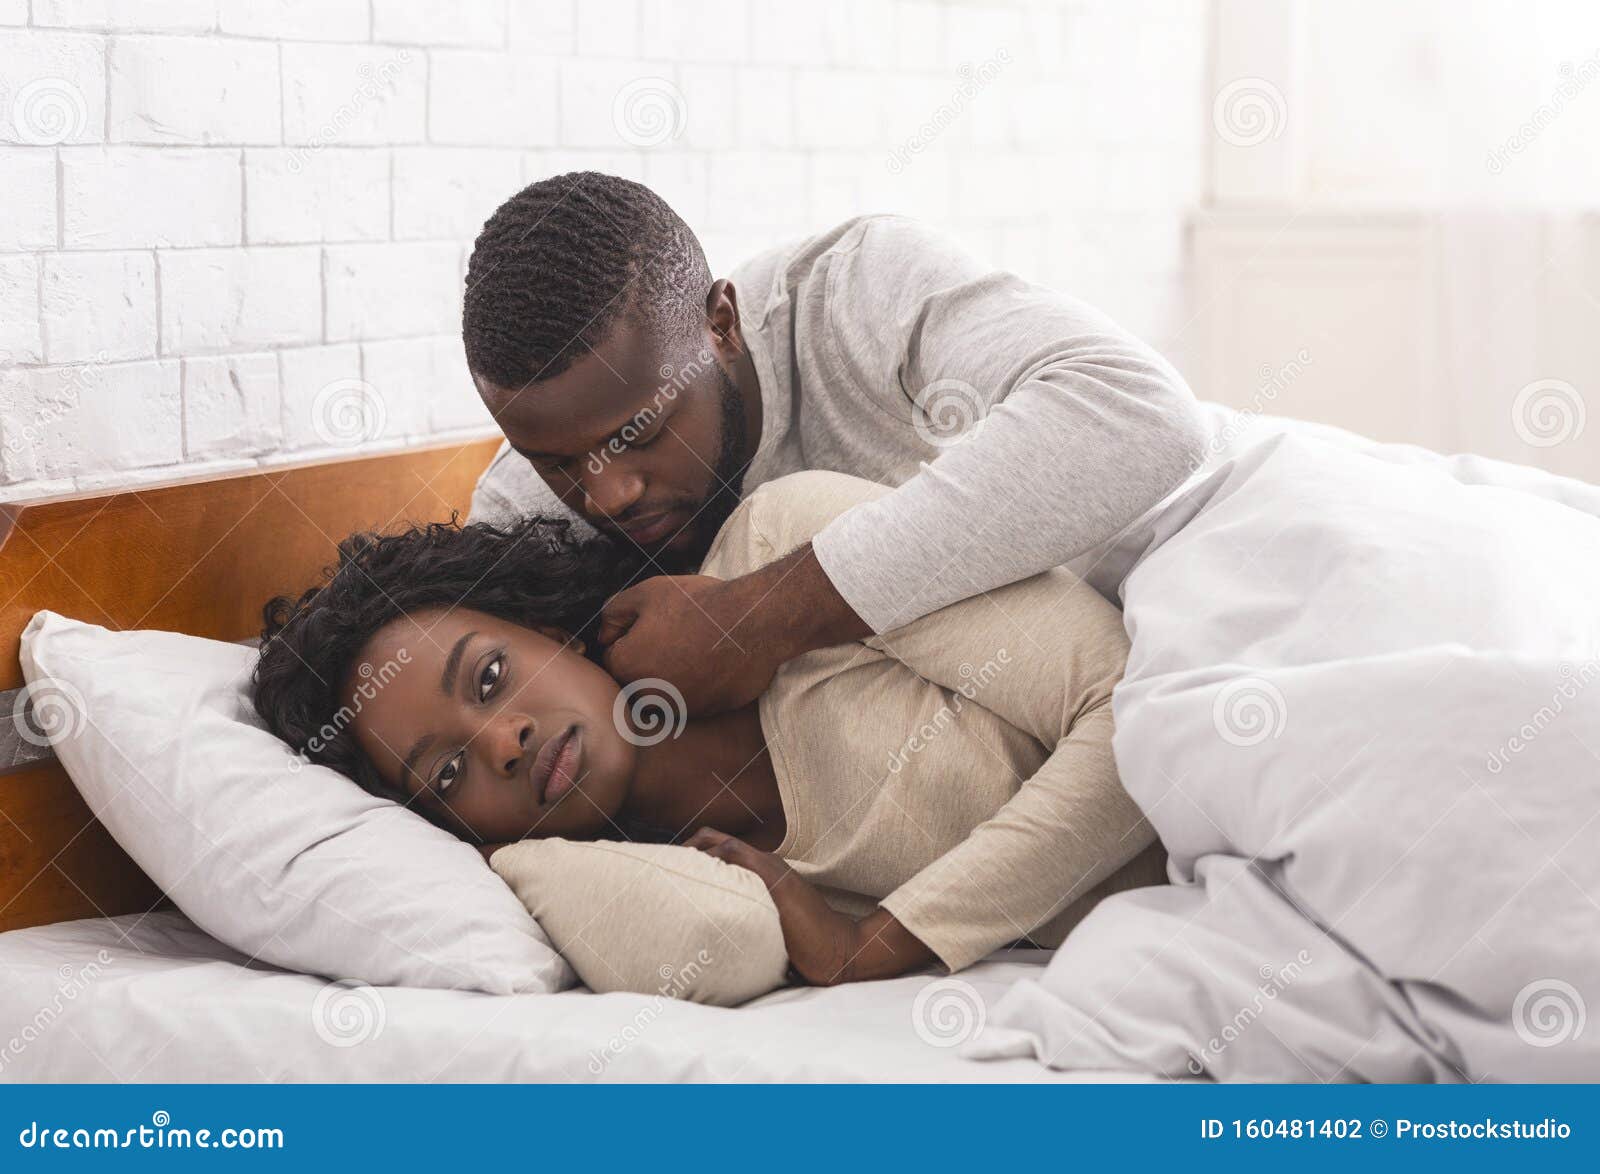 Black woman ignoring husband in bed, refusing to make love. Frigidity concept. Young african american wife refusing to make love with her husband, ignoring him in bed.